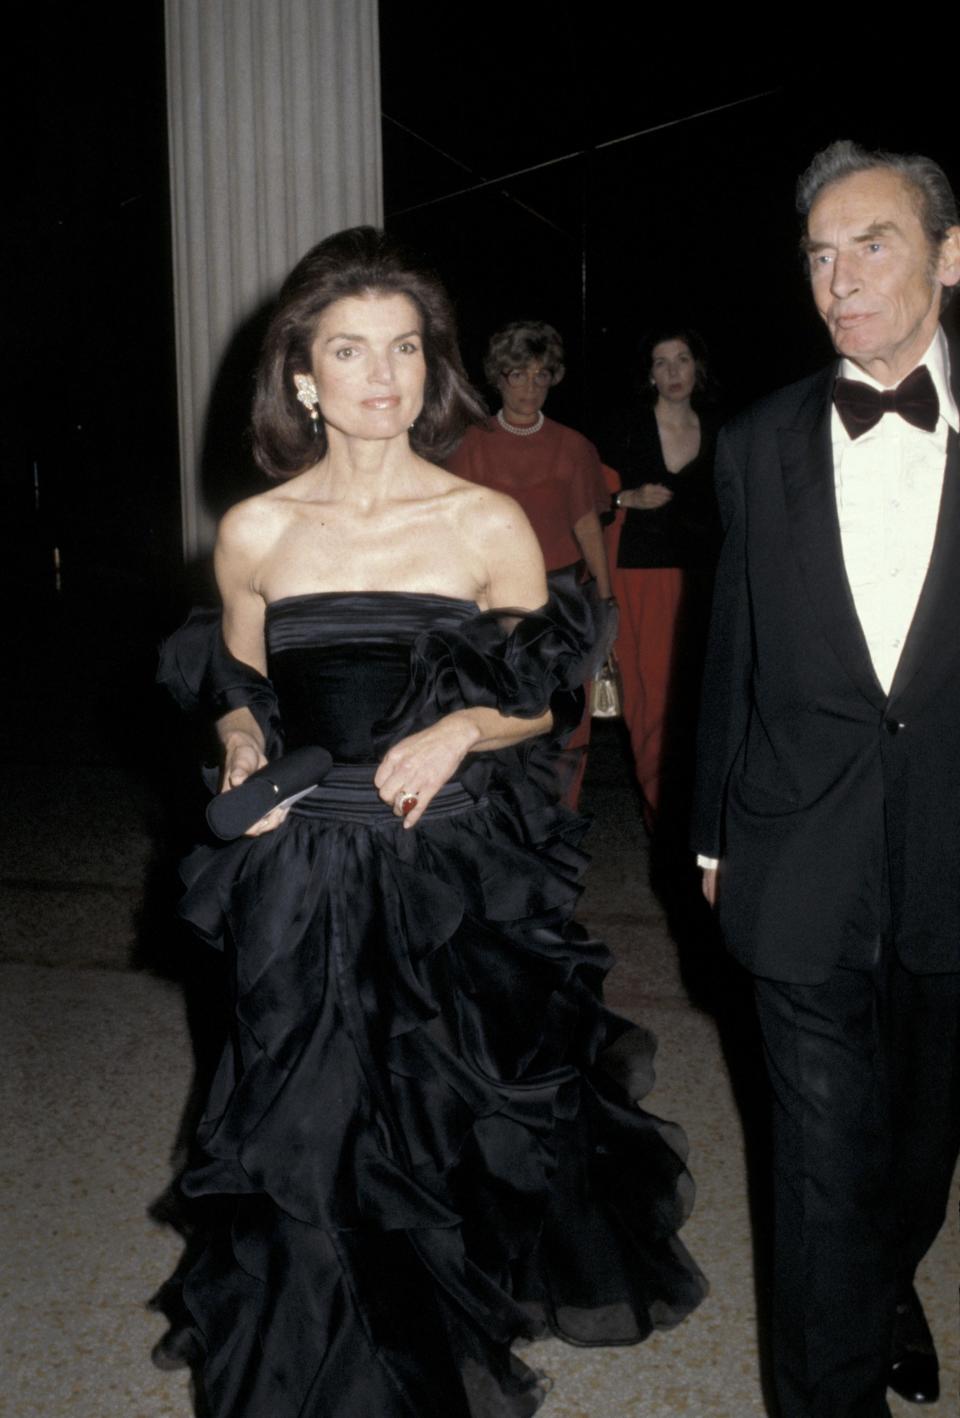 Jackie O’s appearance in 1979